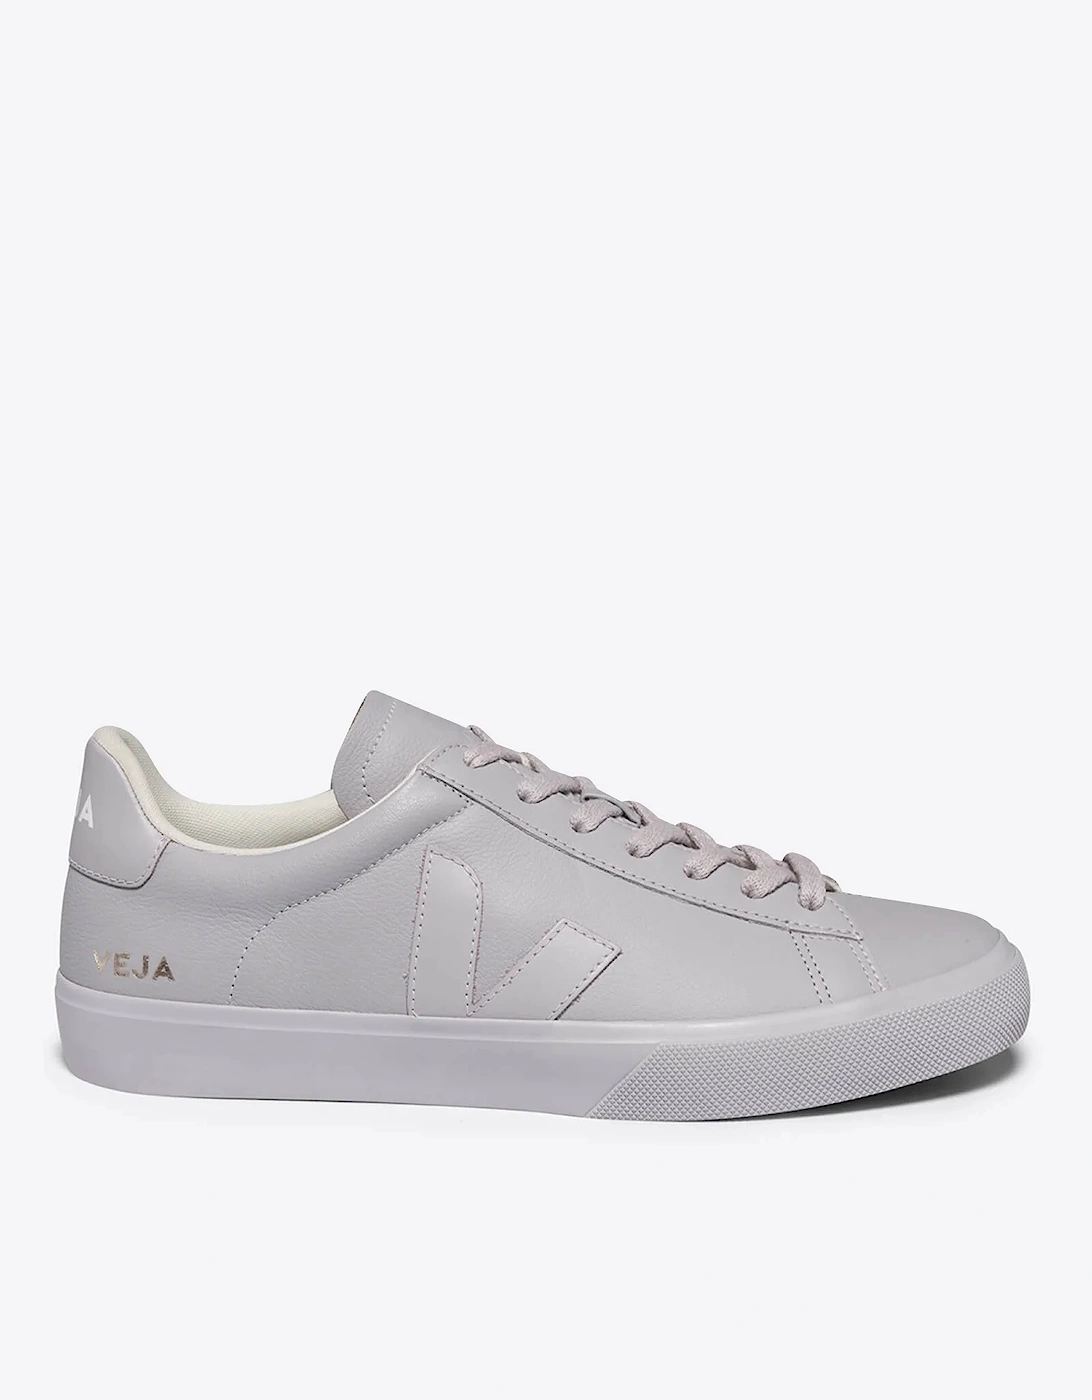 Women's Campo Chrome-Free Leather Trainers - - Home - Women's Shoes - Women's Trainers - Women's Low Top Trainers - Women's Campo Chrome-Free Leather Trainers, 2 of 1